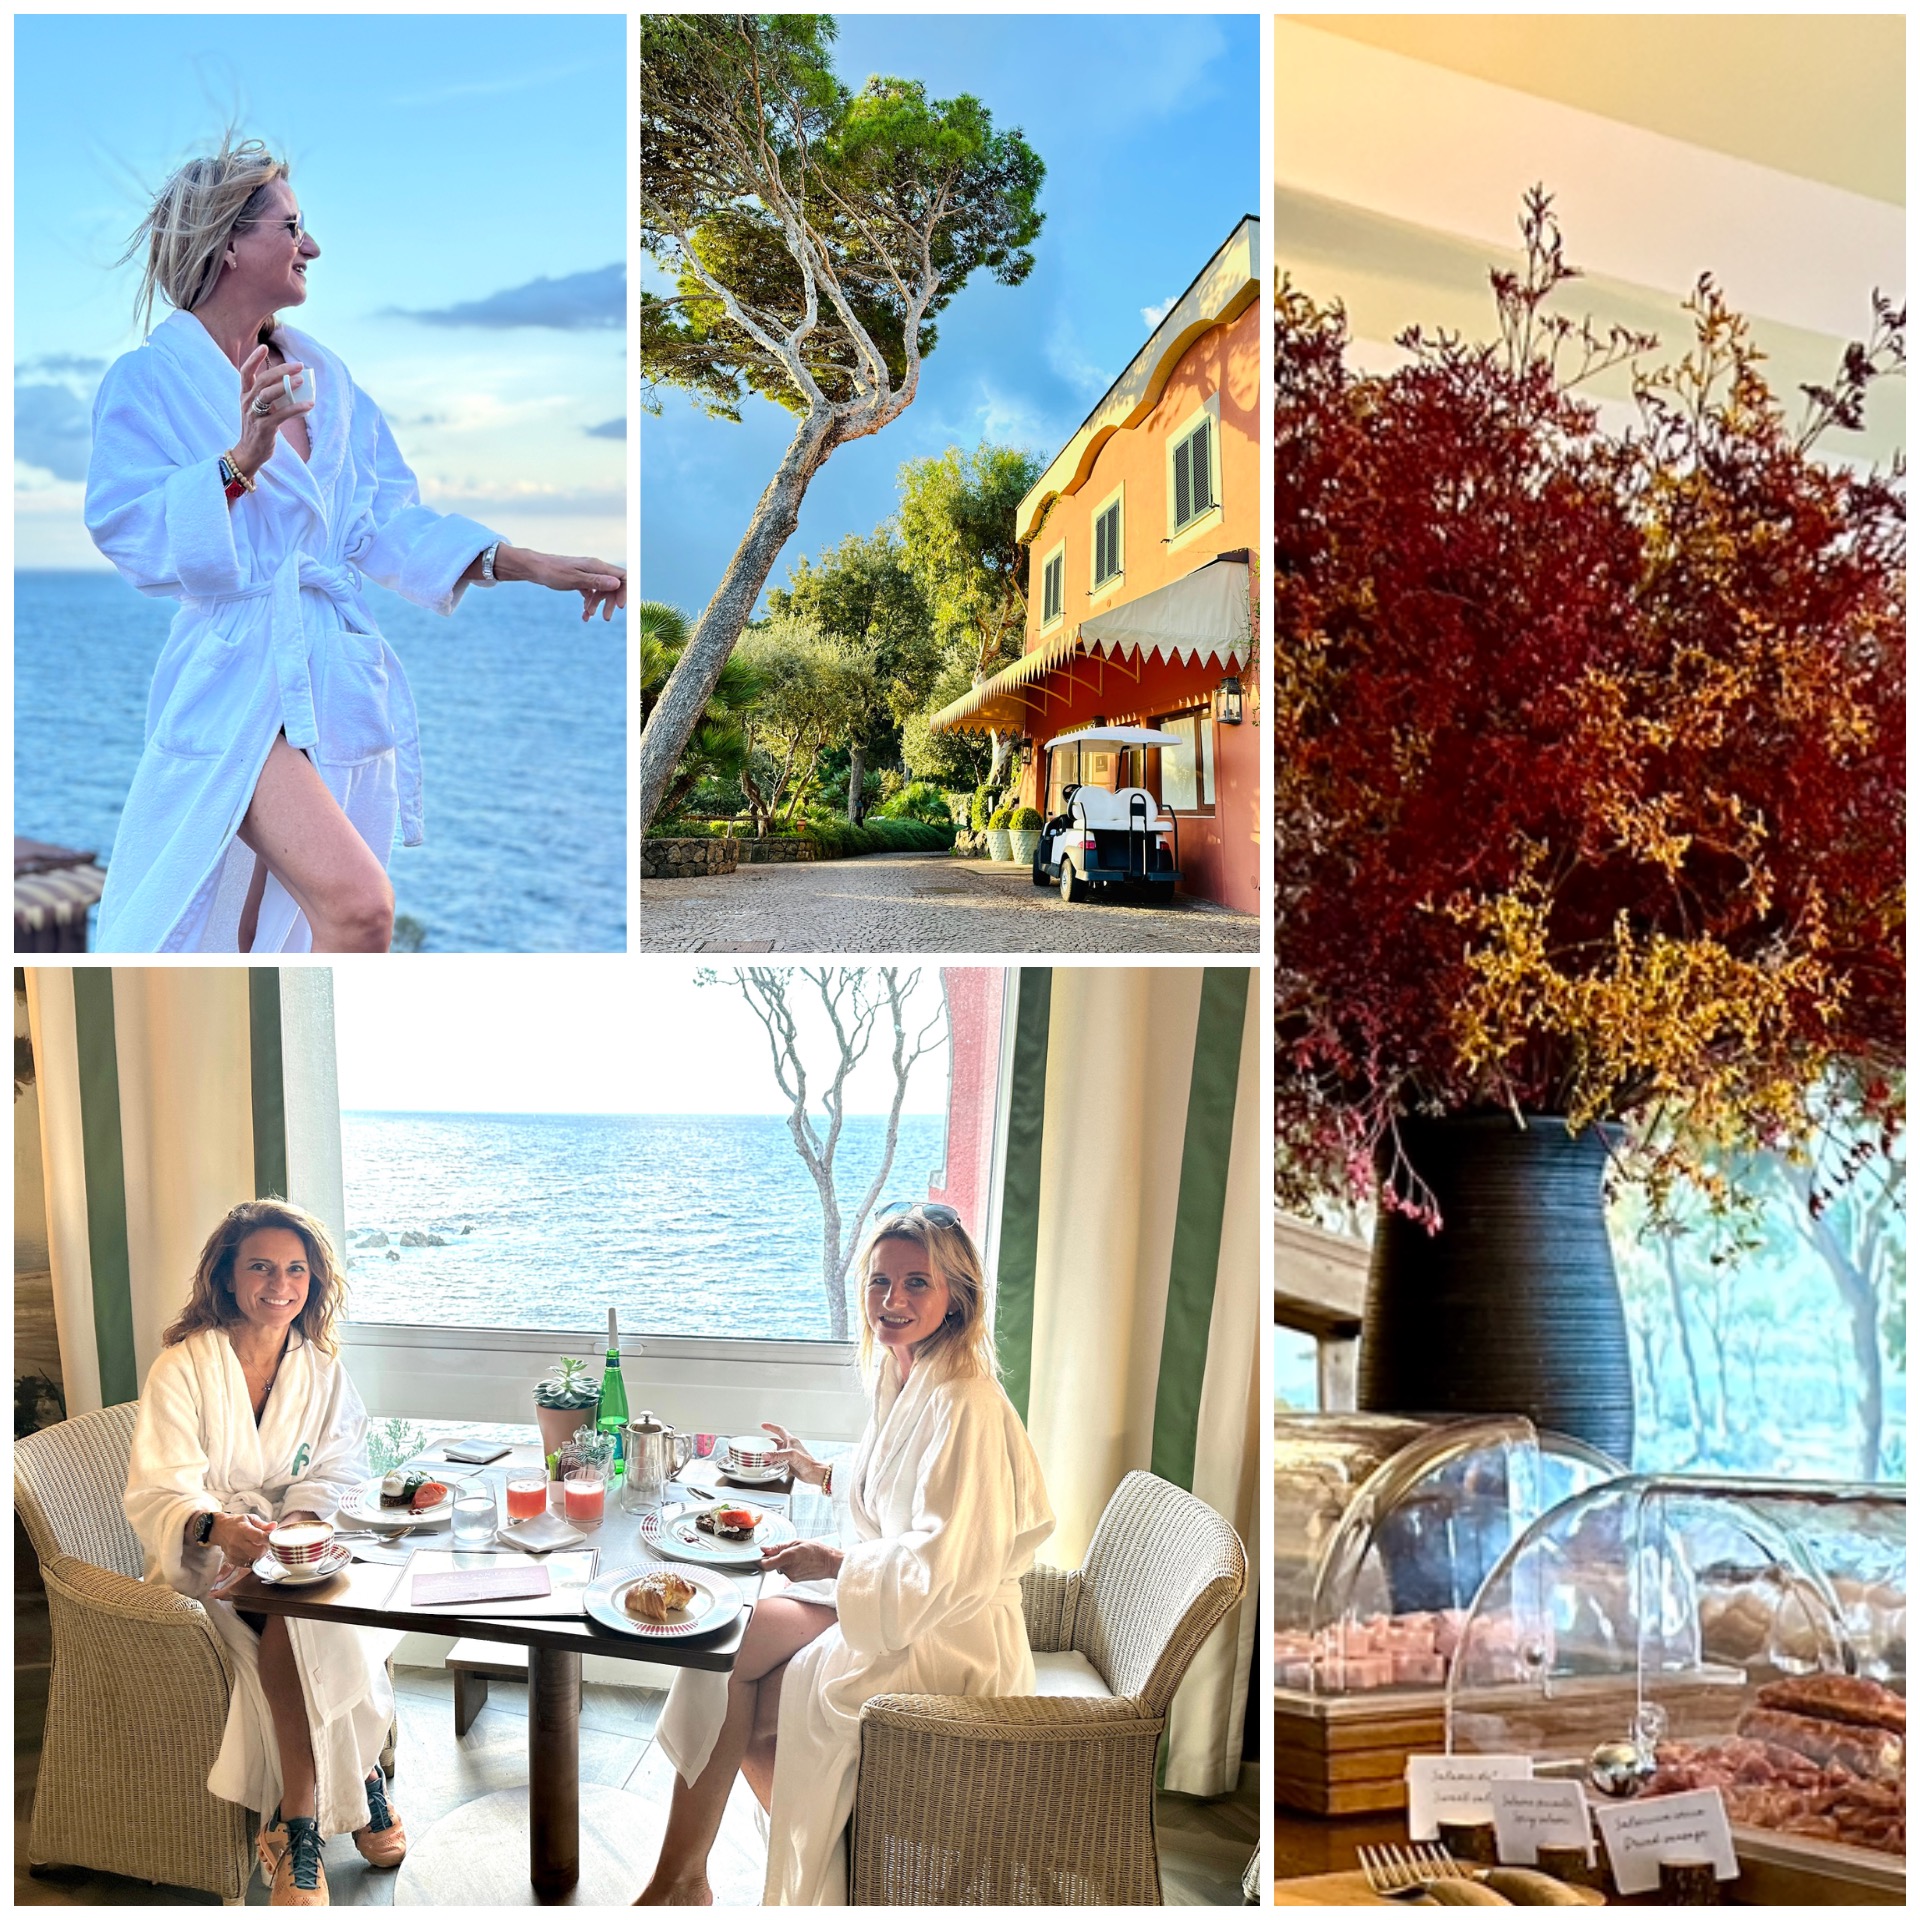 Ischia - The Insider Travel Guide
Mezzatorre Hotel & Thermal Spa